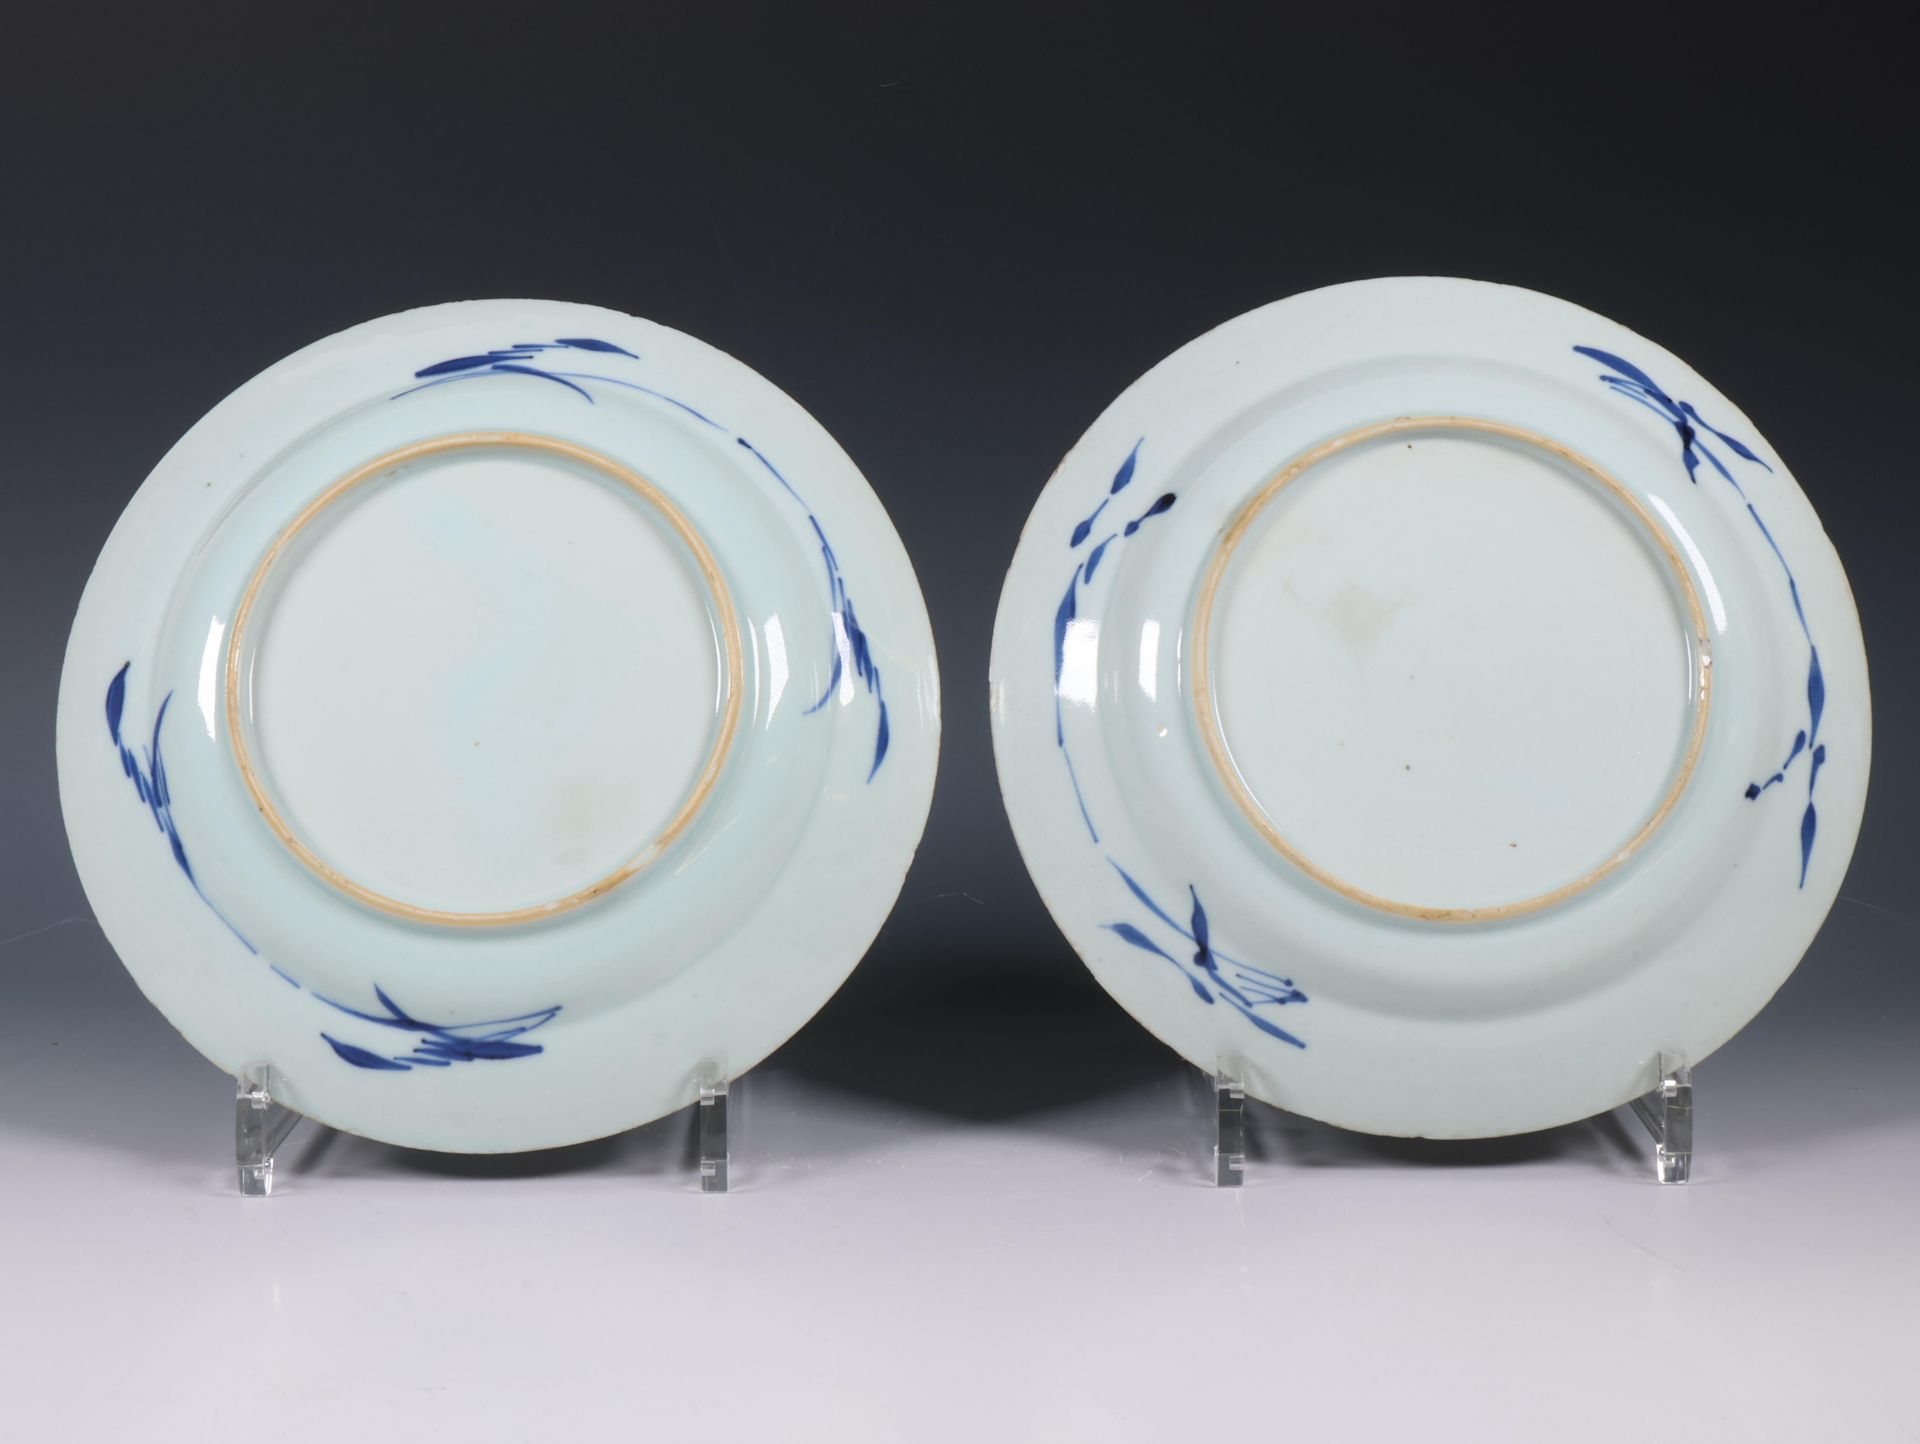 China, two pairs of blue and white plates, Kangxi period (1662-1722) and 18th century, - Image 2 of 4